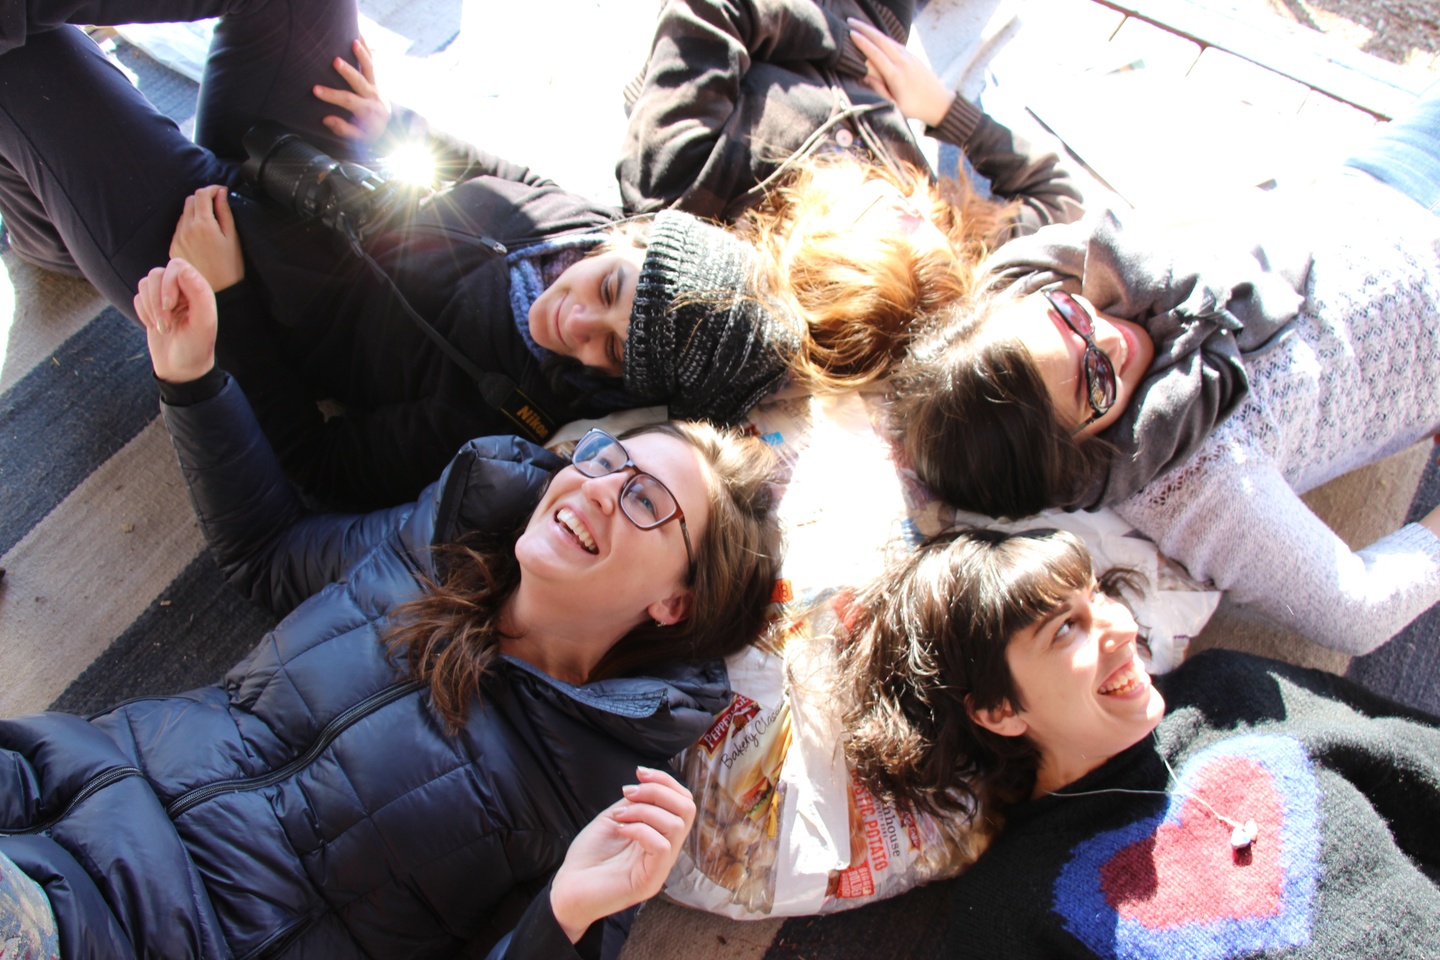 A group of people are smiling, with their heads laying on a bag.